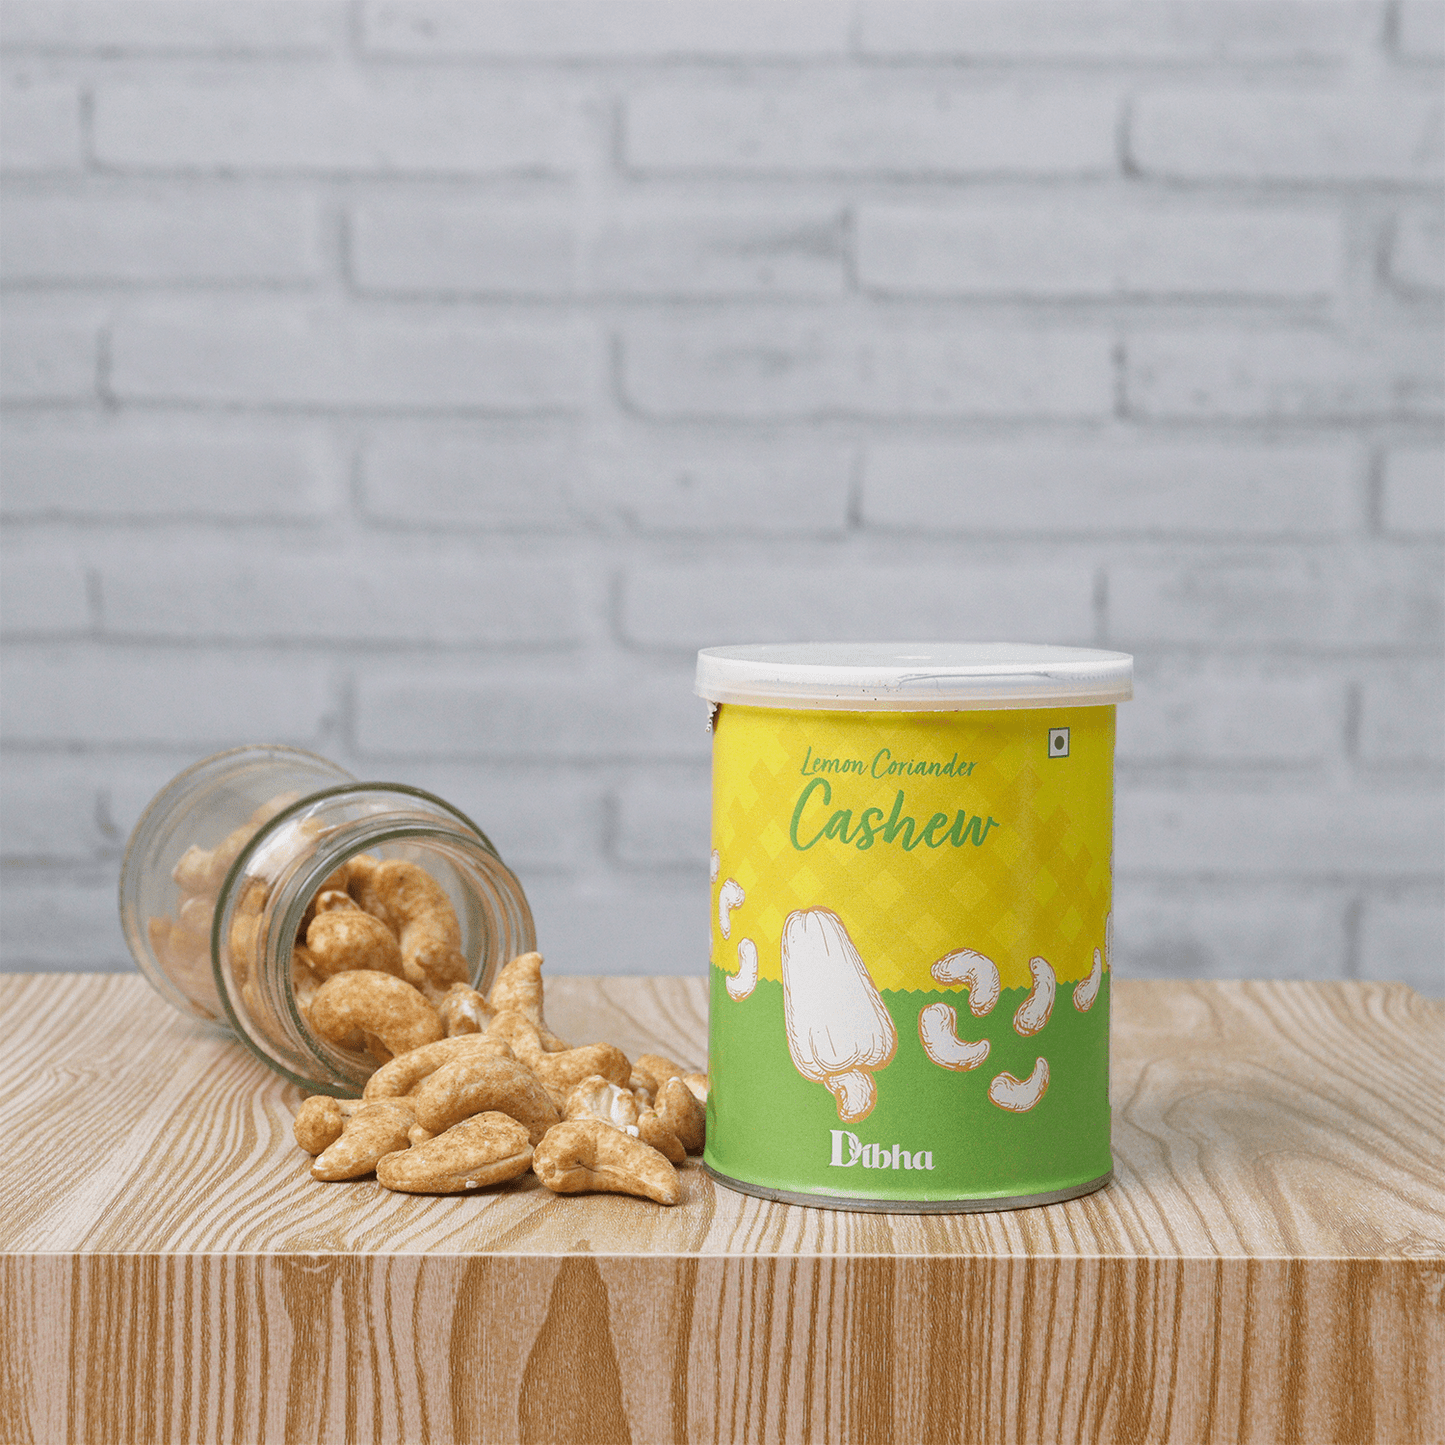 DIBHA - HONEST SNACKING Lemon Coriander Cashew 100g (Healthy Nuts, Anytime Munching, Rich in Fiber & Protein, All Time Snack)